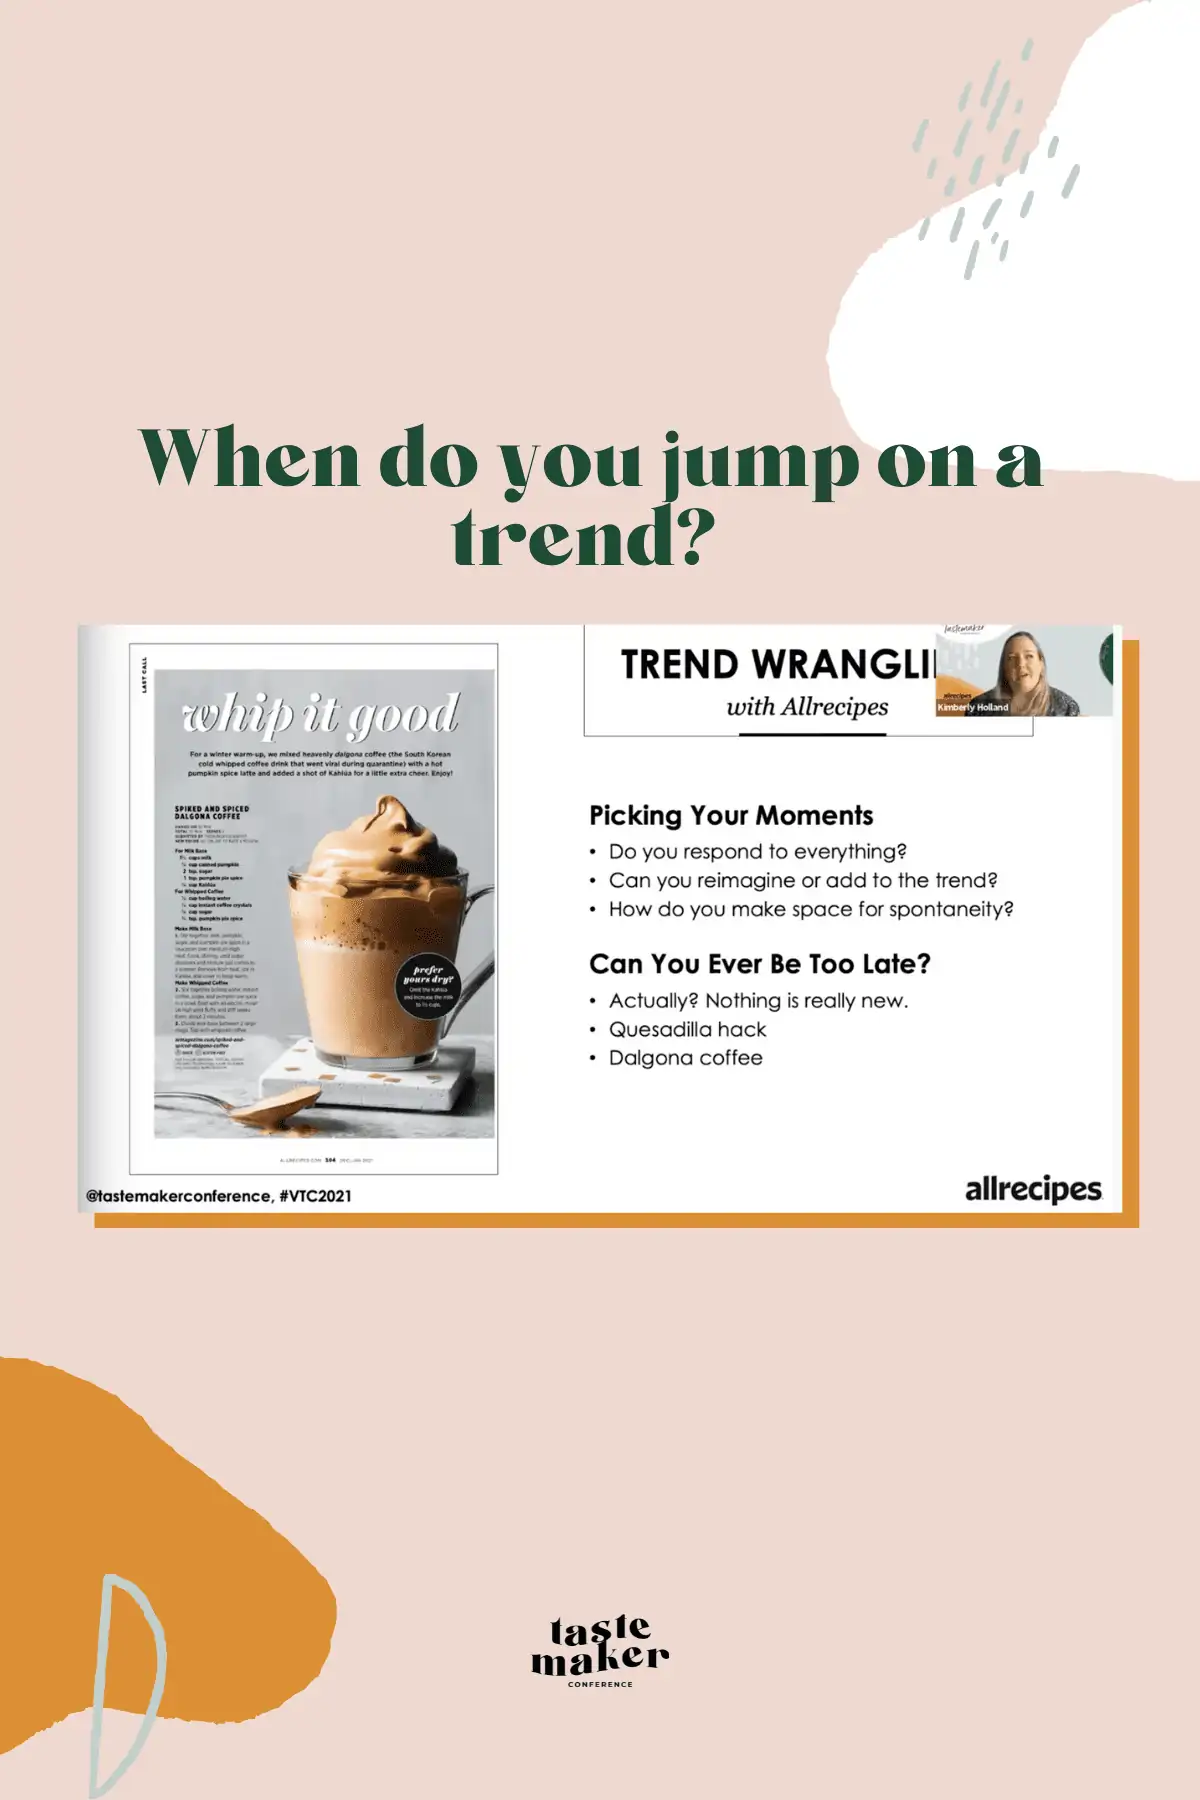 slide with title of section and image from webinar - when to jump on trends